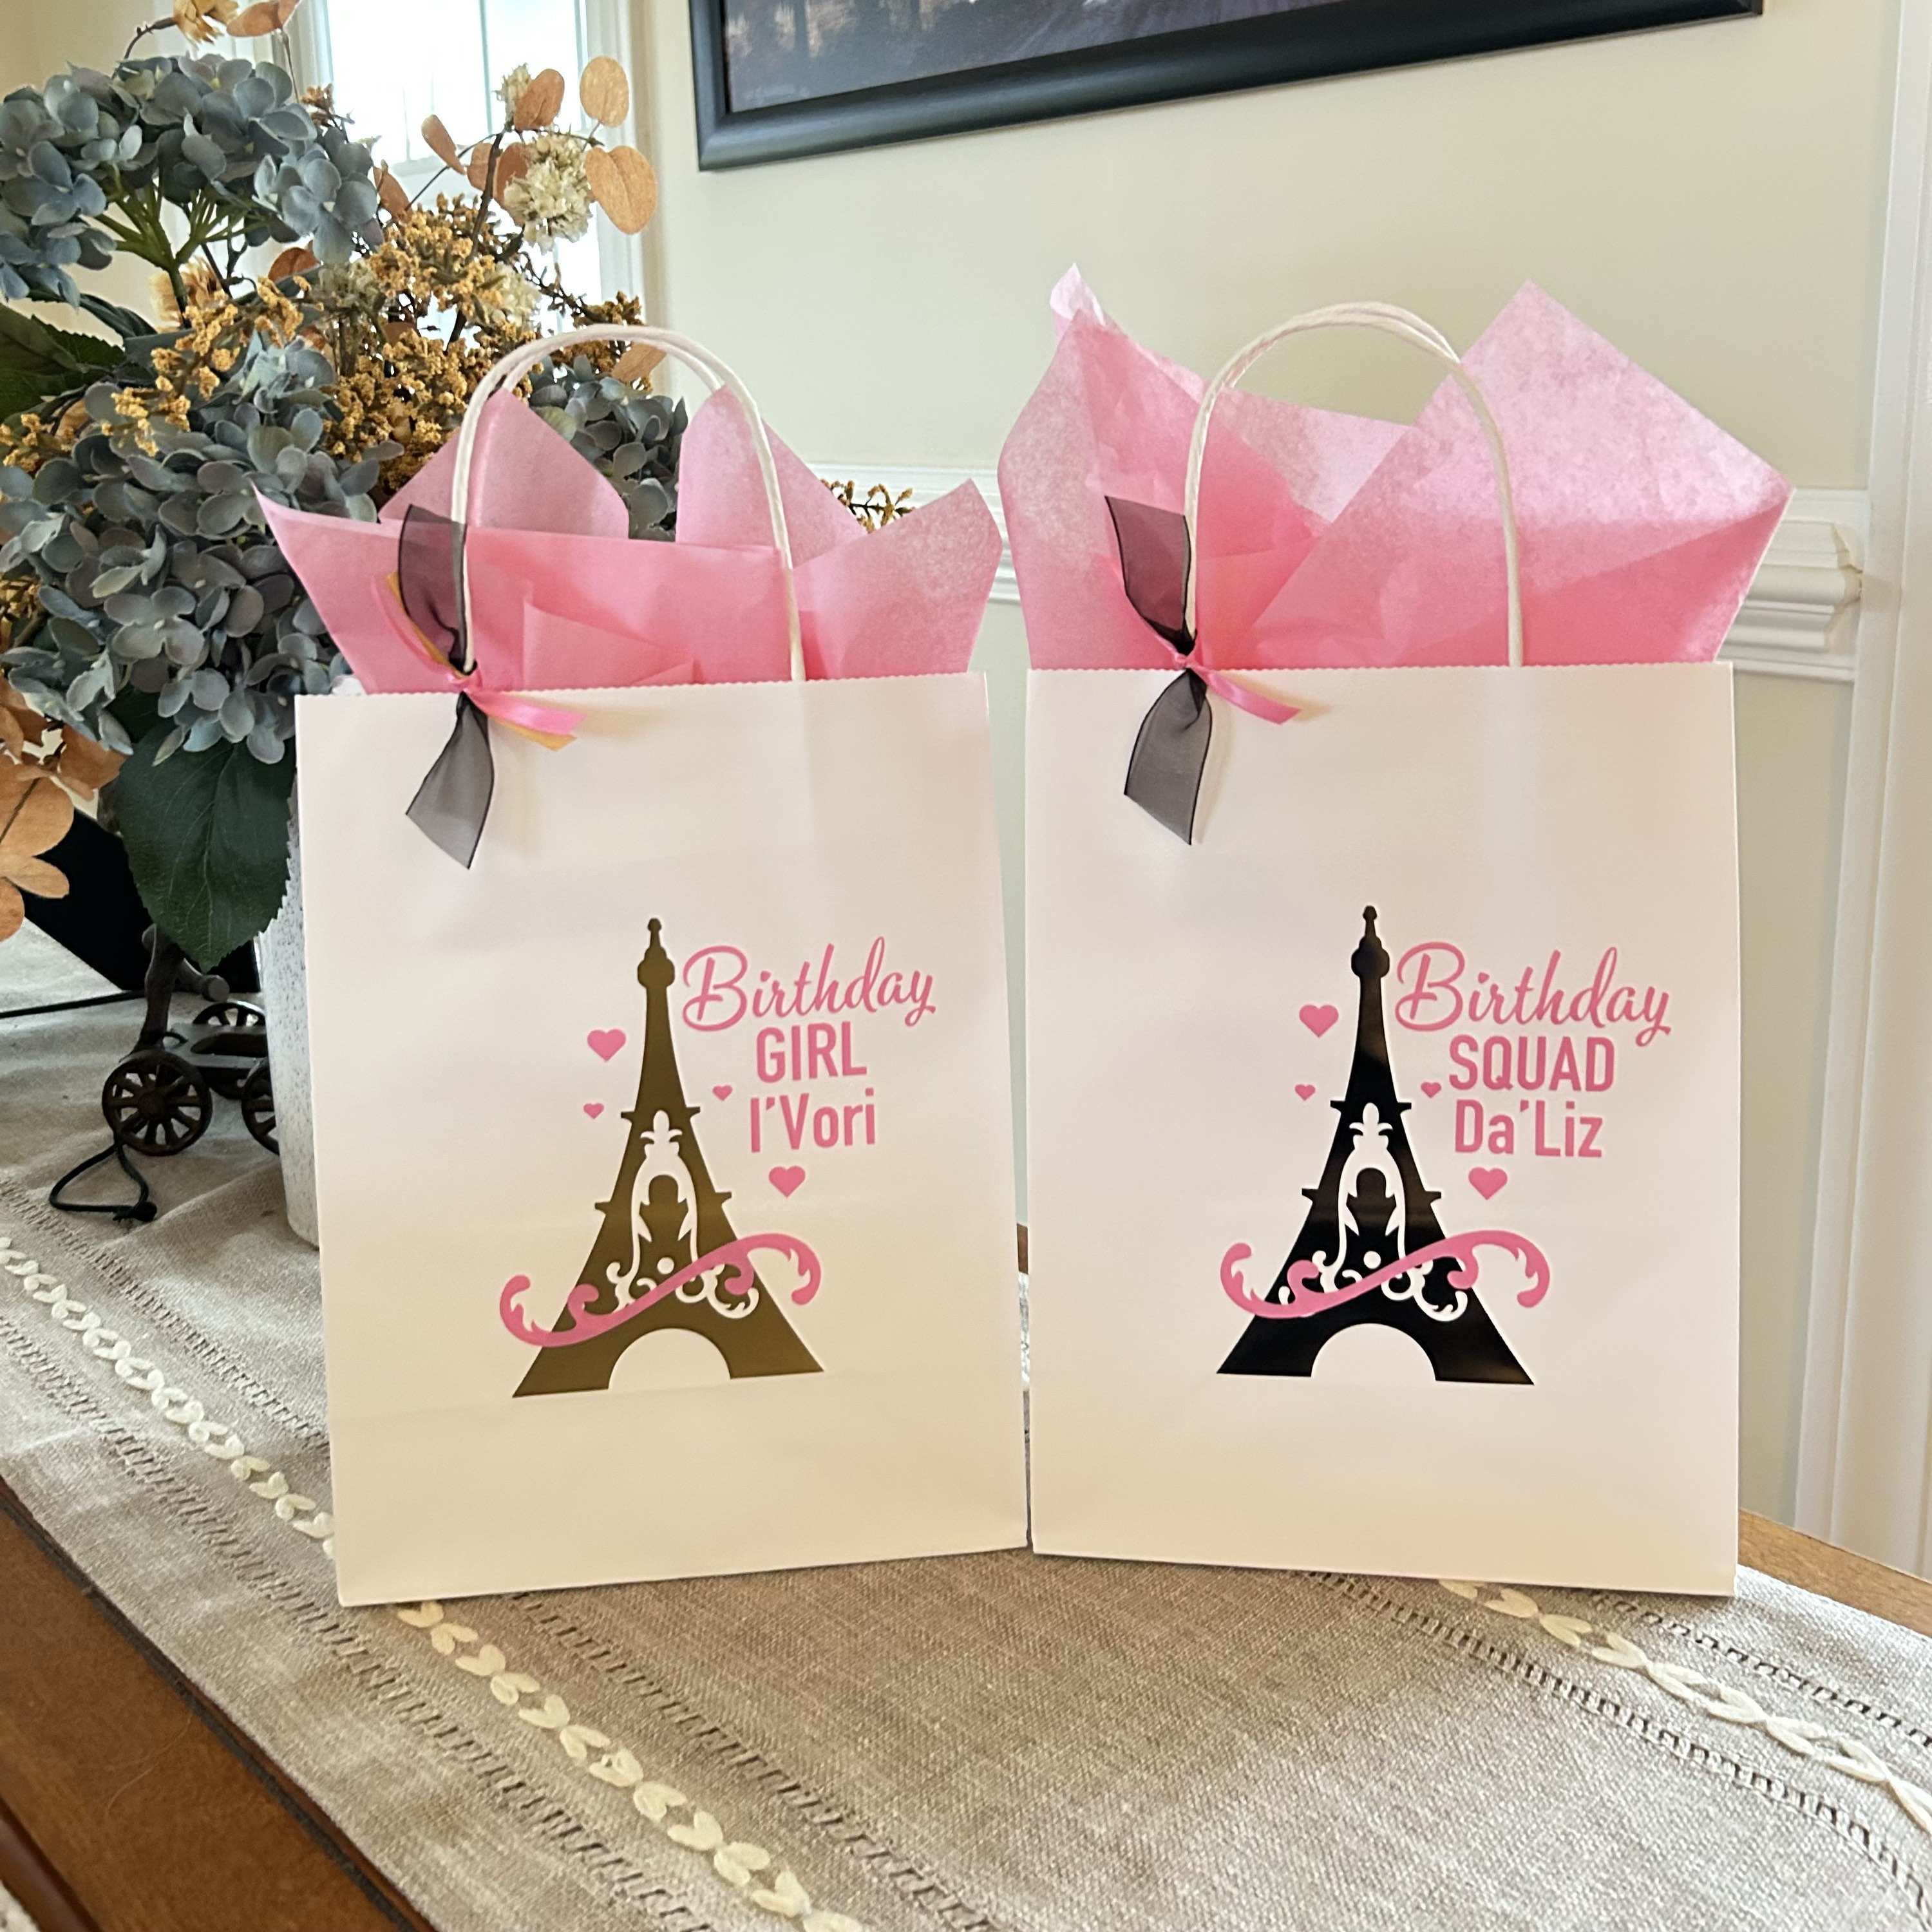 french inspired party: favors …  Paris themed party favors, French party,  Paris theme party